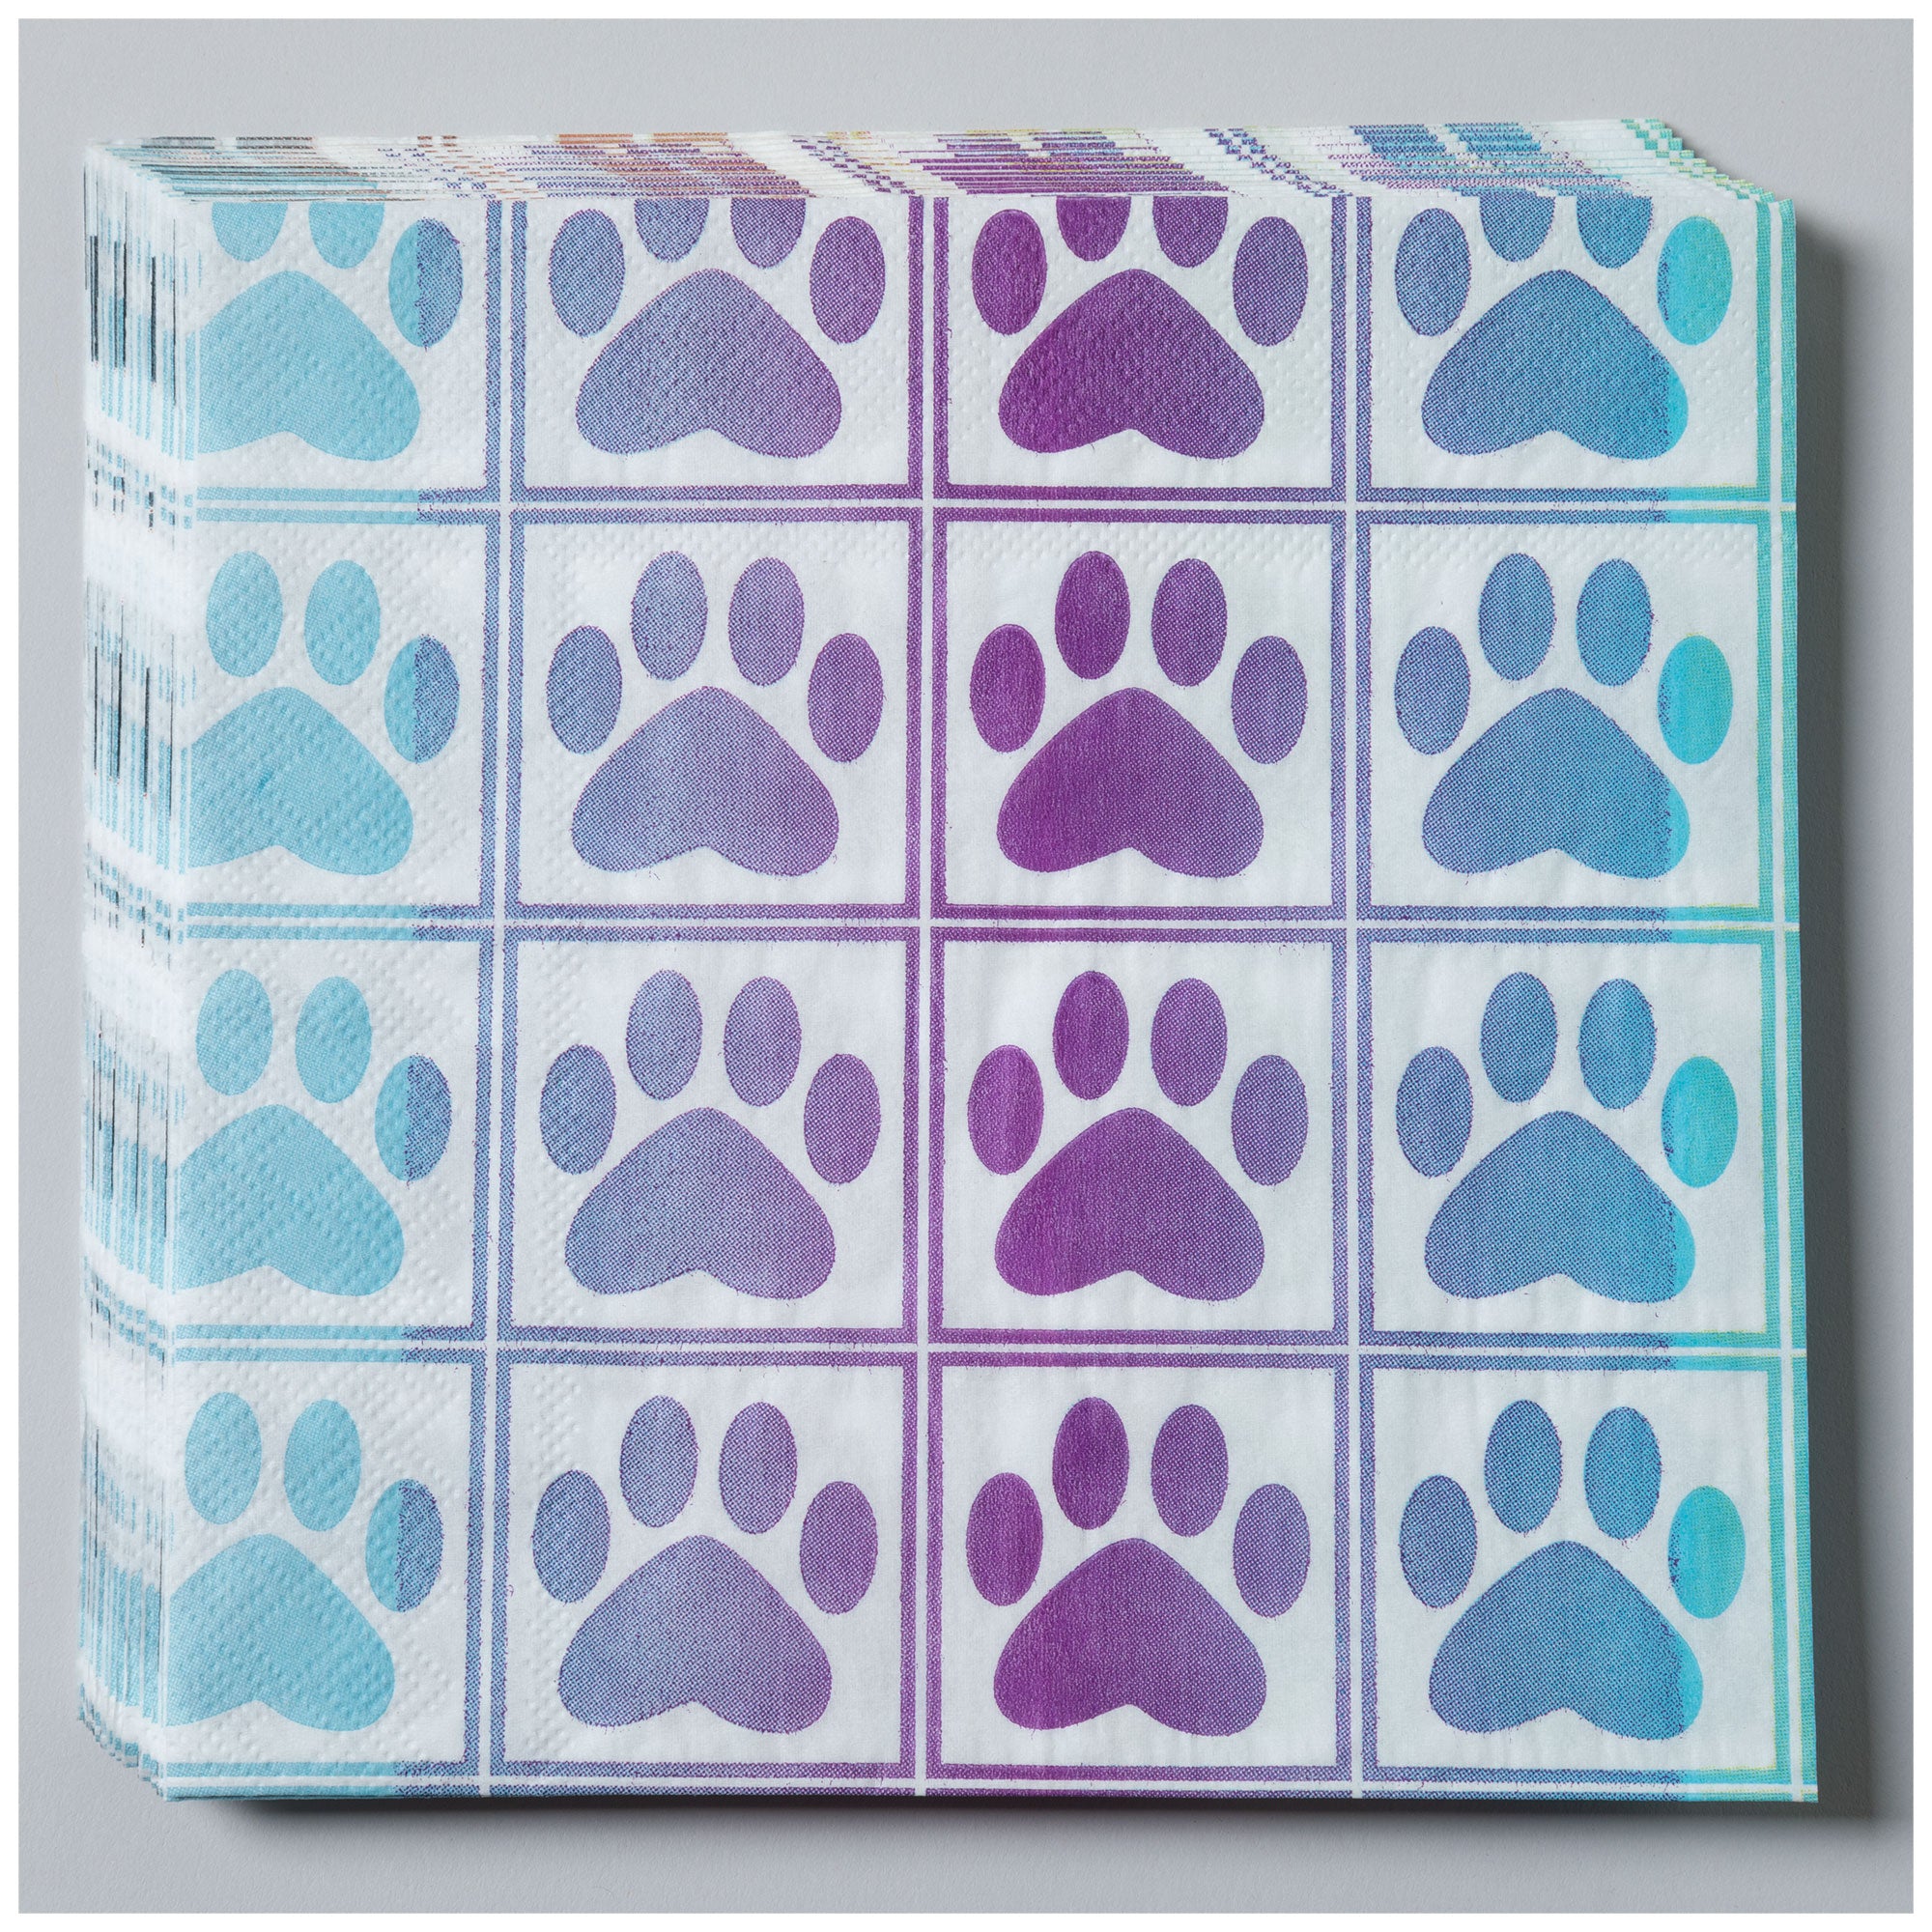 Pawfect Occasion Paper Plates & Napkins - Rainbow Checkered Paws - Napkins Only